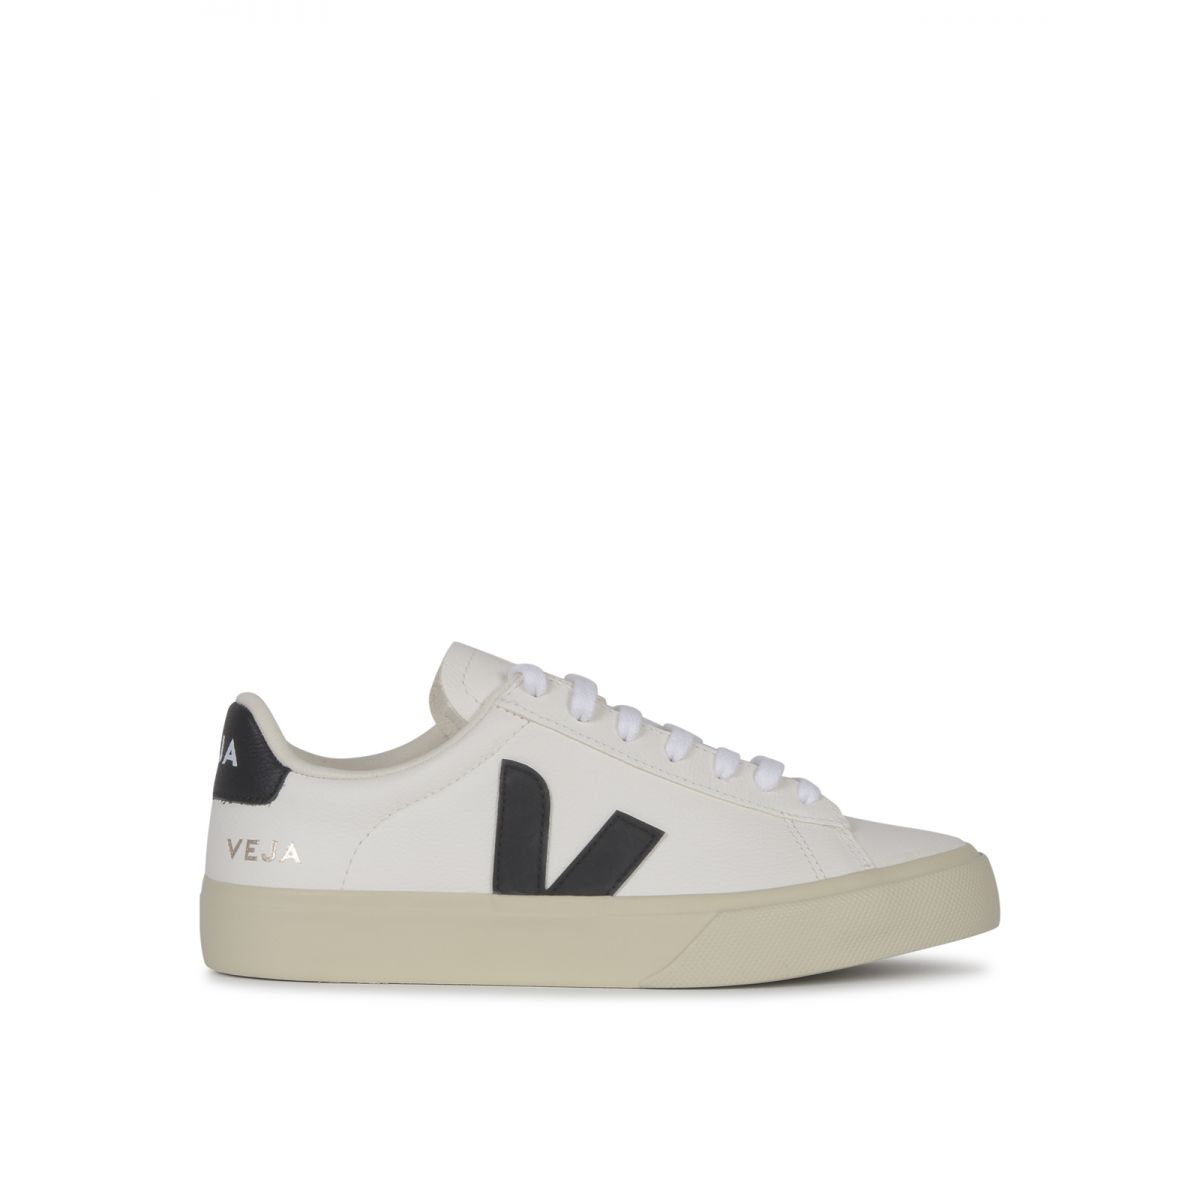 VEJA - Campo low-top sneakers